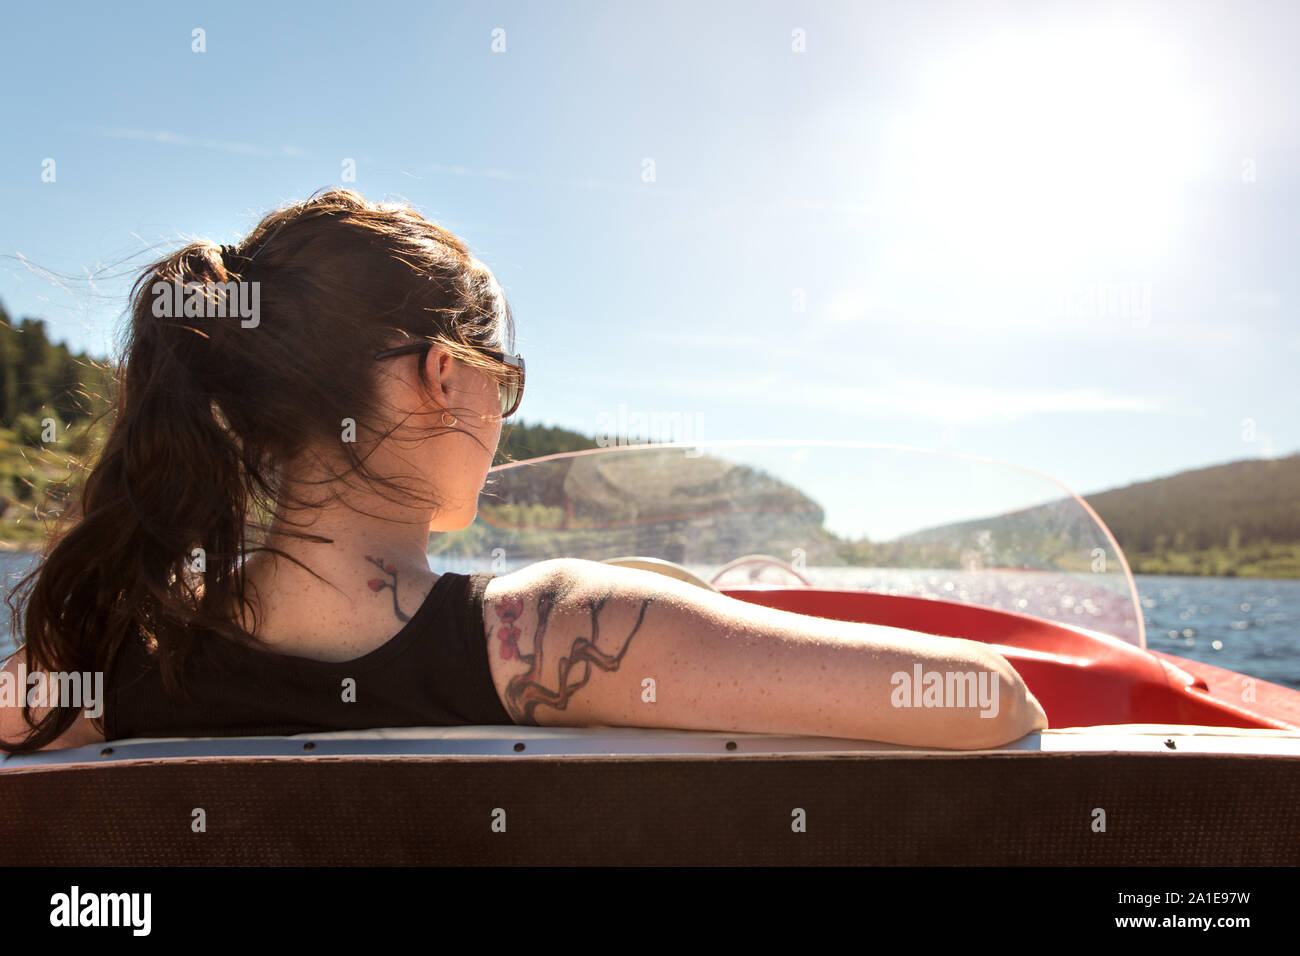 Backview from a woman in a boat, boating lake and blue sky with copyspace Stock Photo